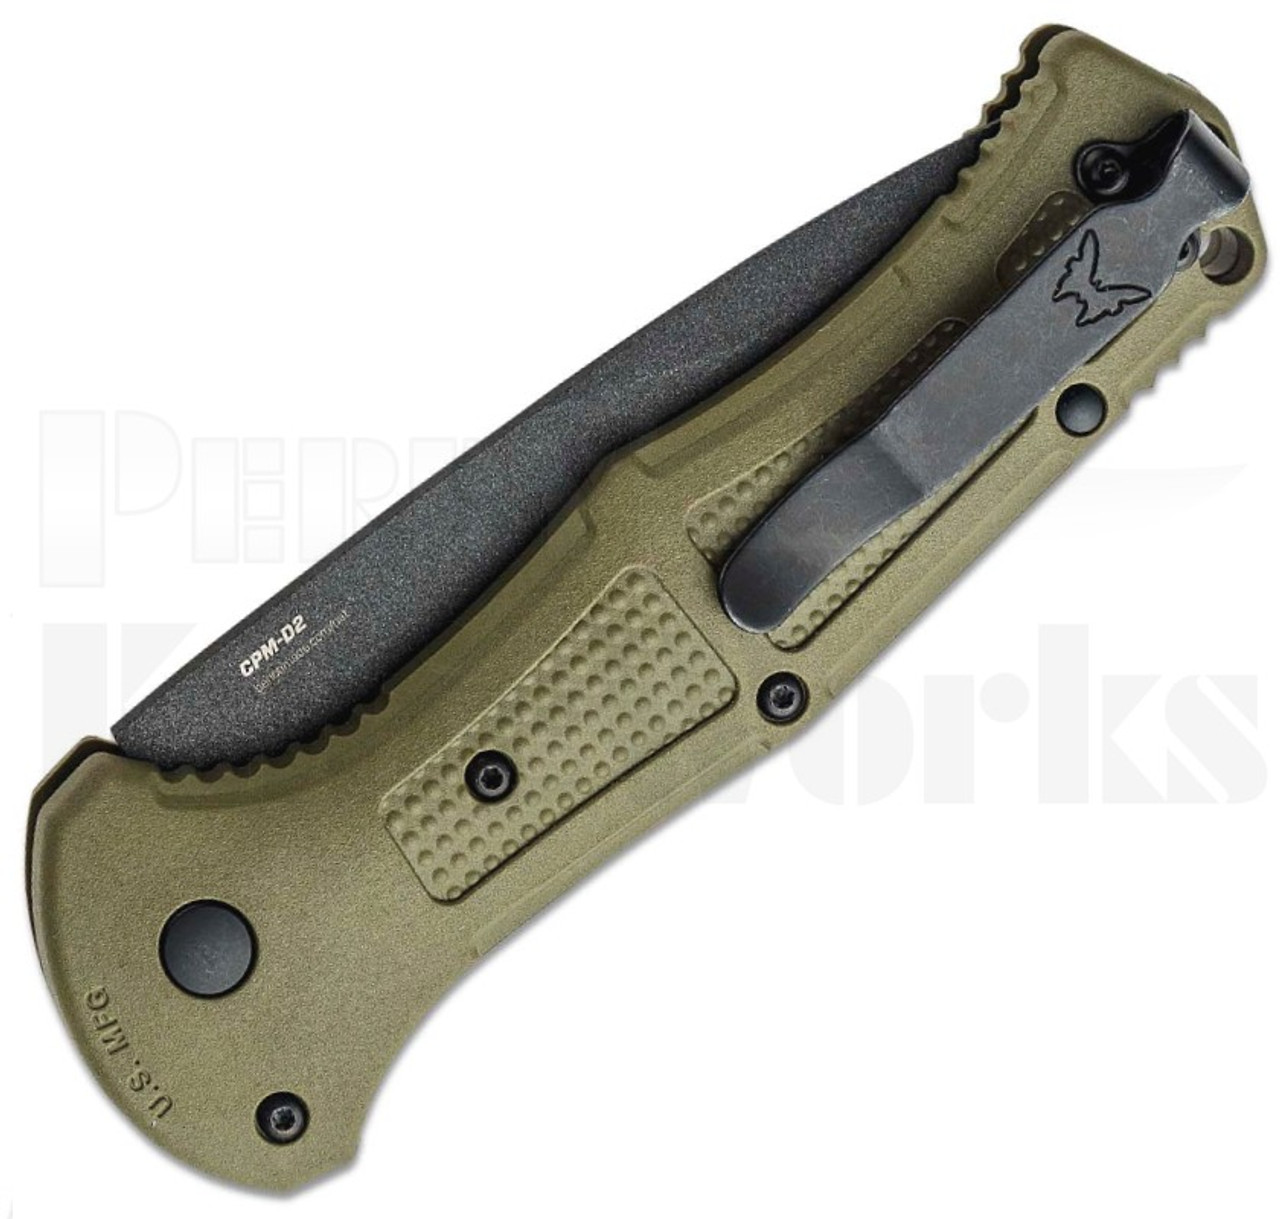 Benchmade Claymore Automatic Knife Ranger Green 9070BK-1